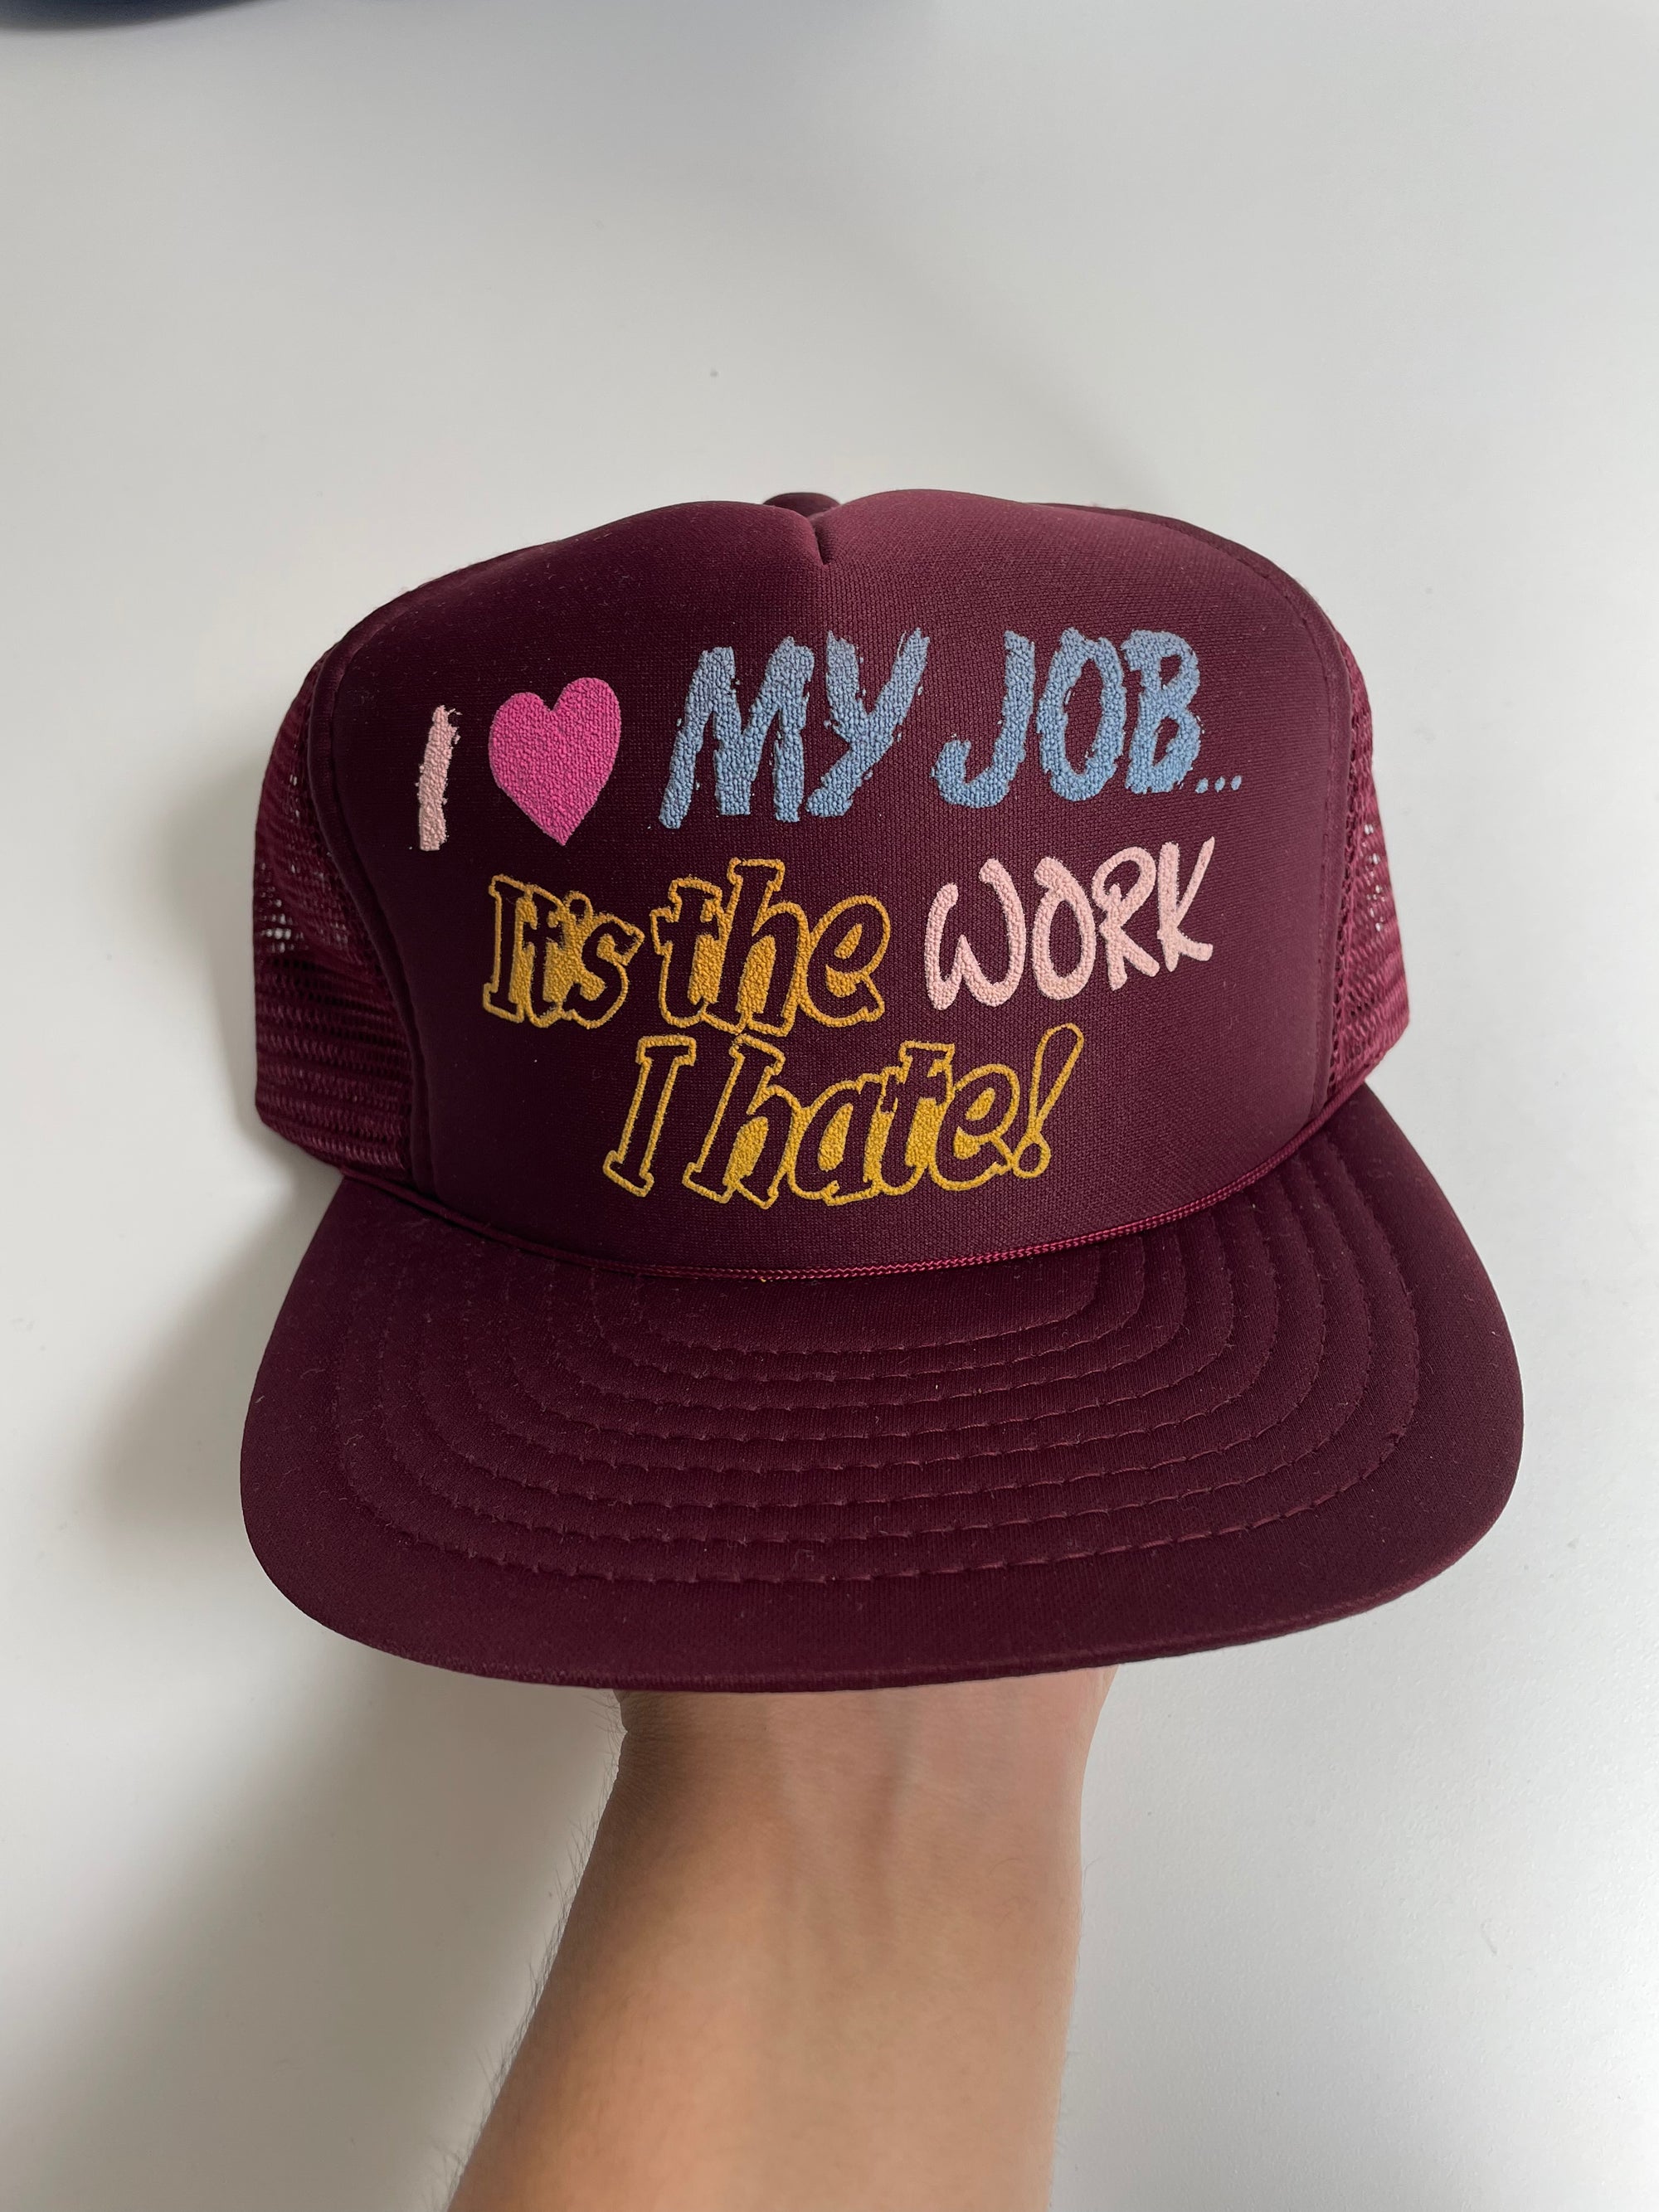 1980s “It’s The Work I Hate!” Trucker Hat